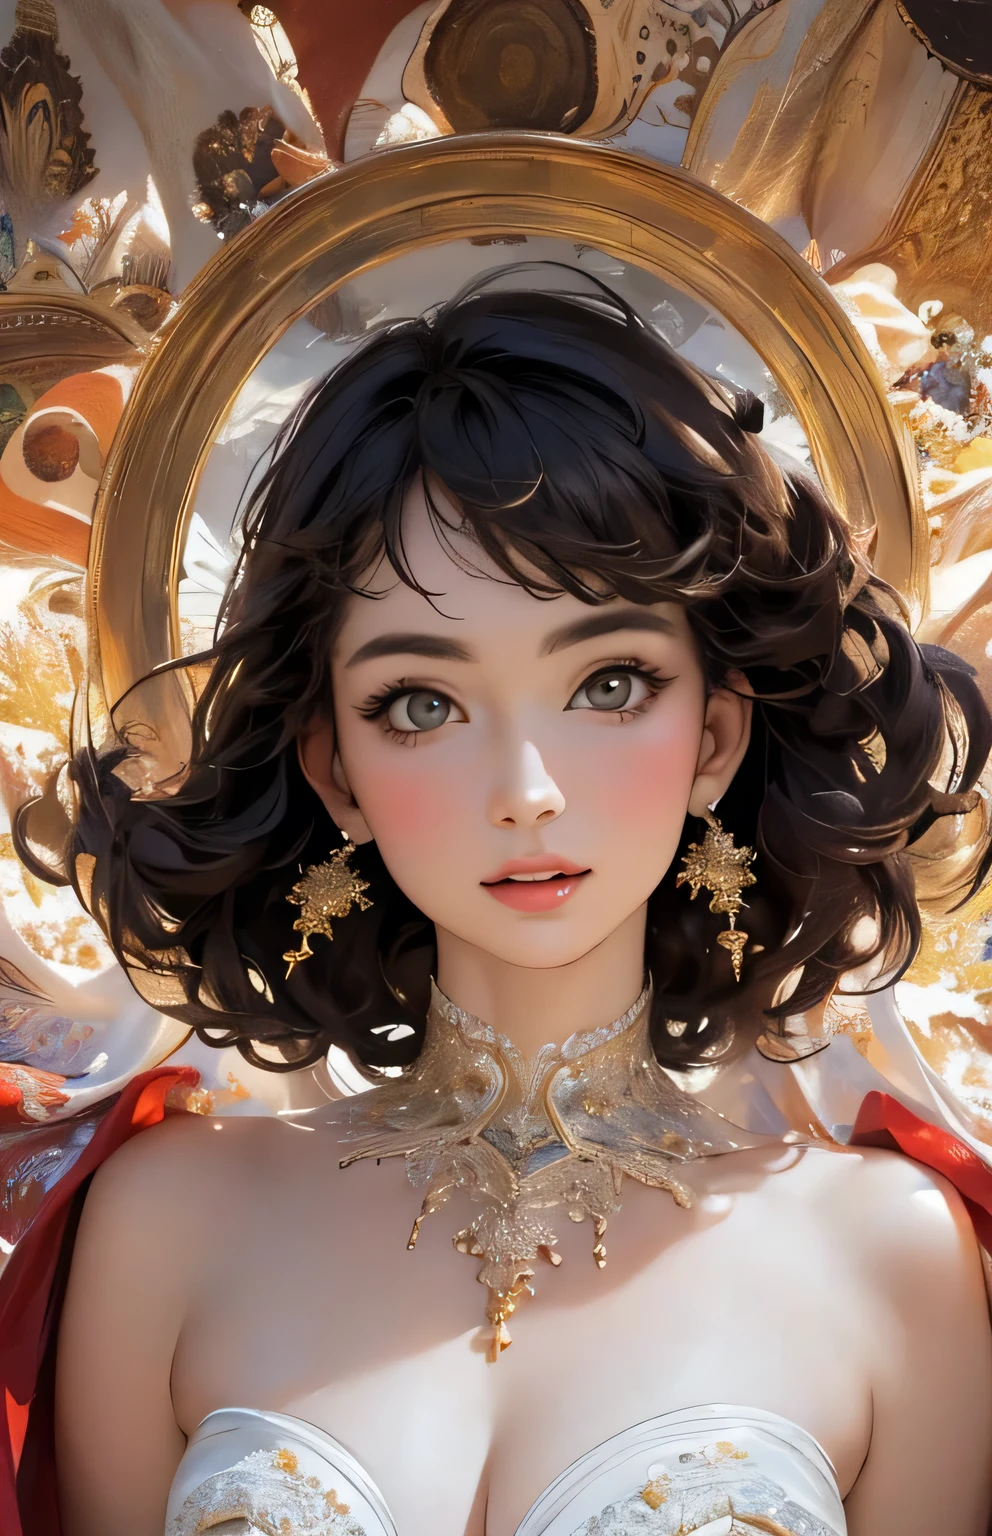 (Masterpiece, Best Quality, Top Quality, Official Art, Beautiful and Aesthetic: 1.2), (One Girl), Accurate Anatomy, Beautiful Face, Detailed and Perfect Face, Big Eyes, Very Detailed, (Fractal Art: 1.3 ), colorful, the best details, refreshing sex appeal, neat, cute, lively spring image paintings,